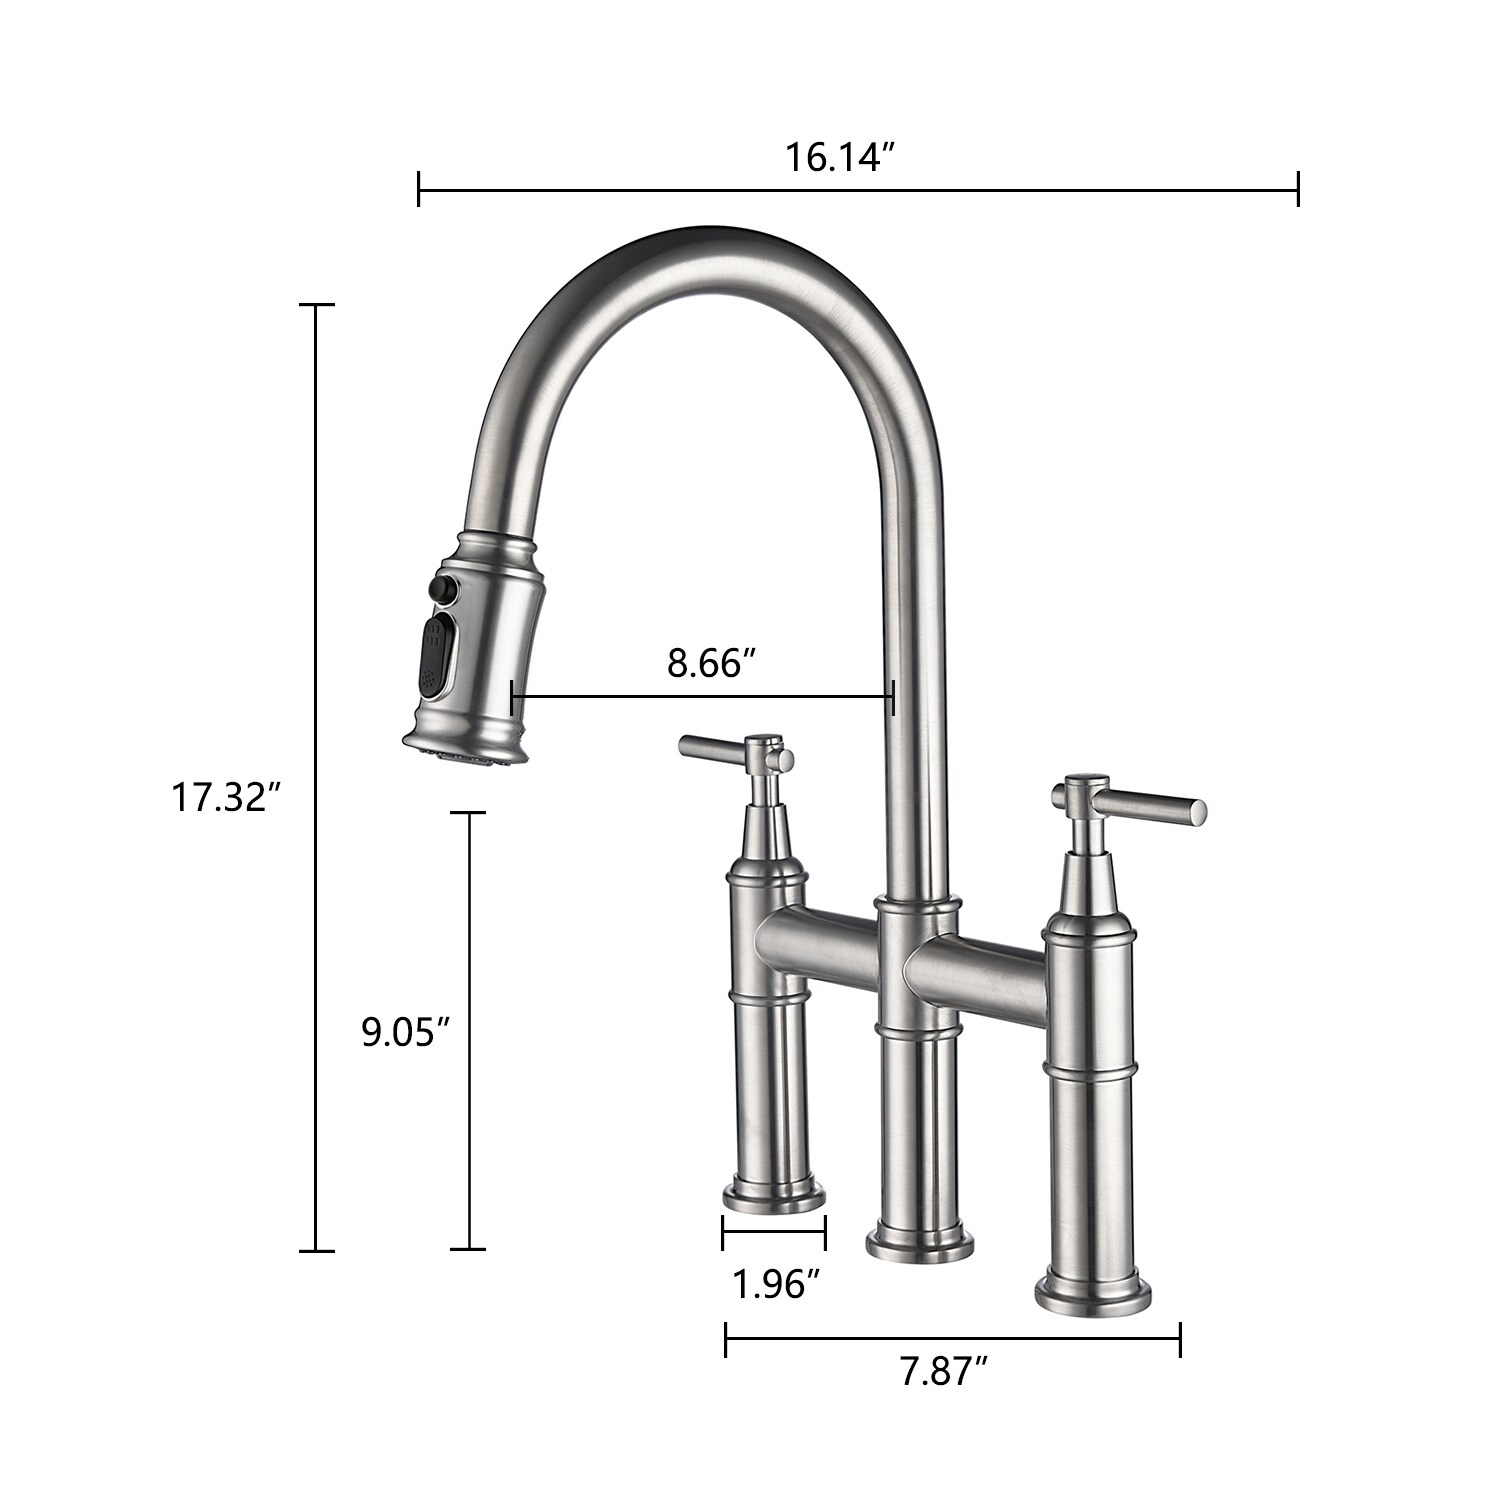 Kitchen Faucet with Pull-Down Sprayhead in Brushed Nickel